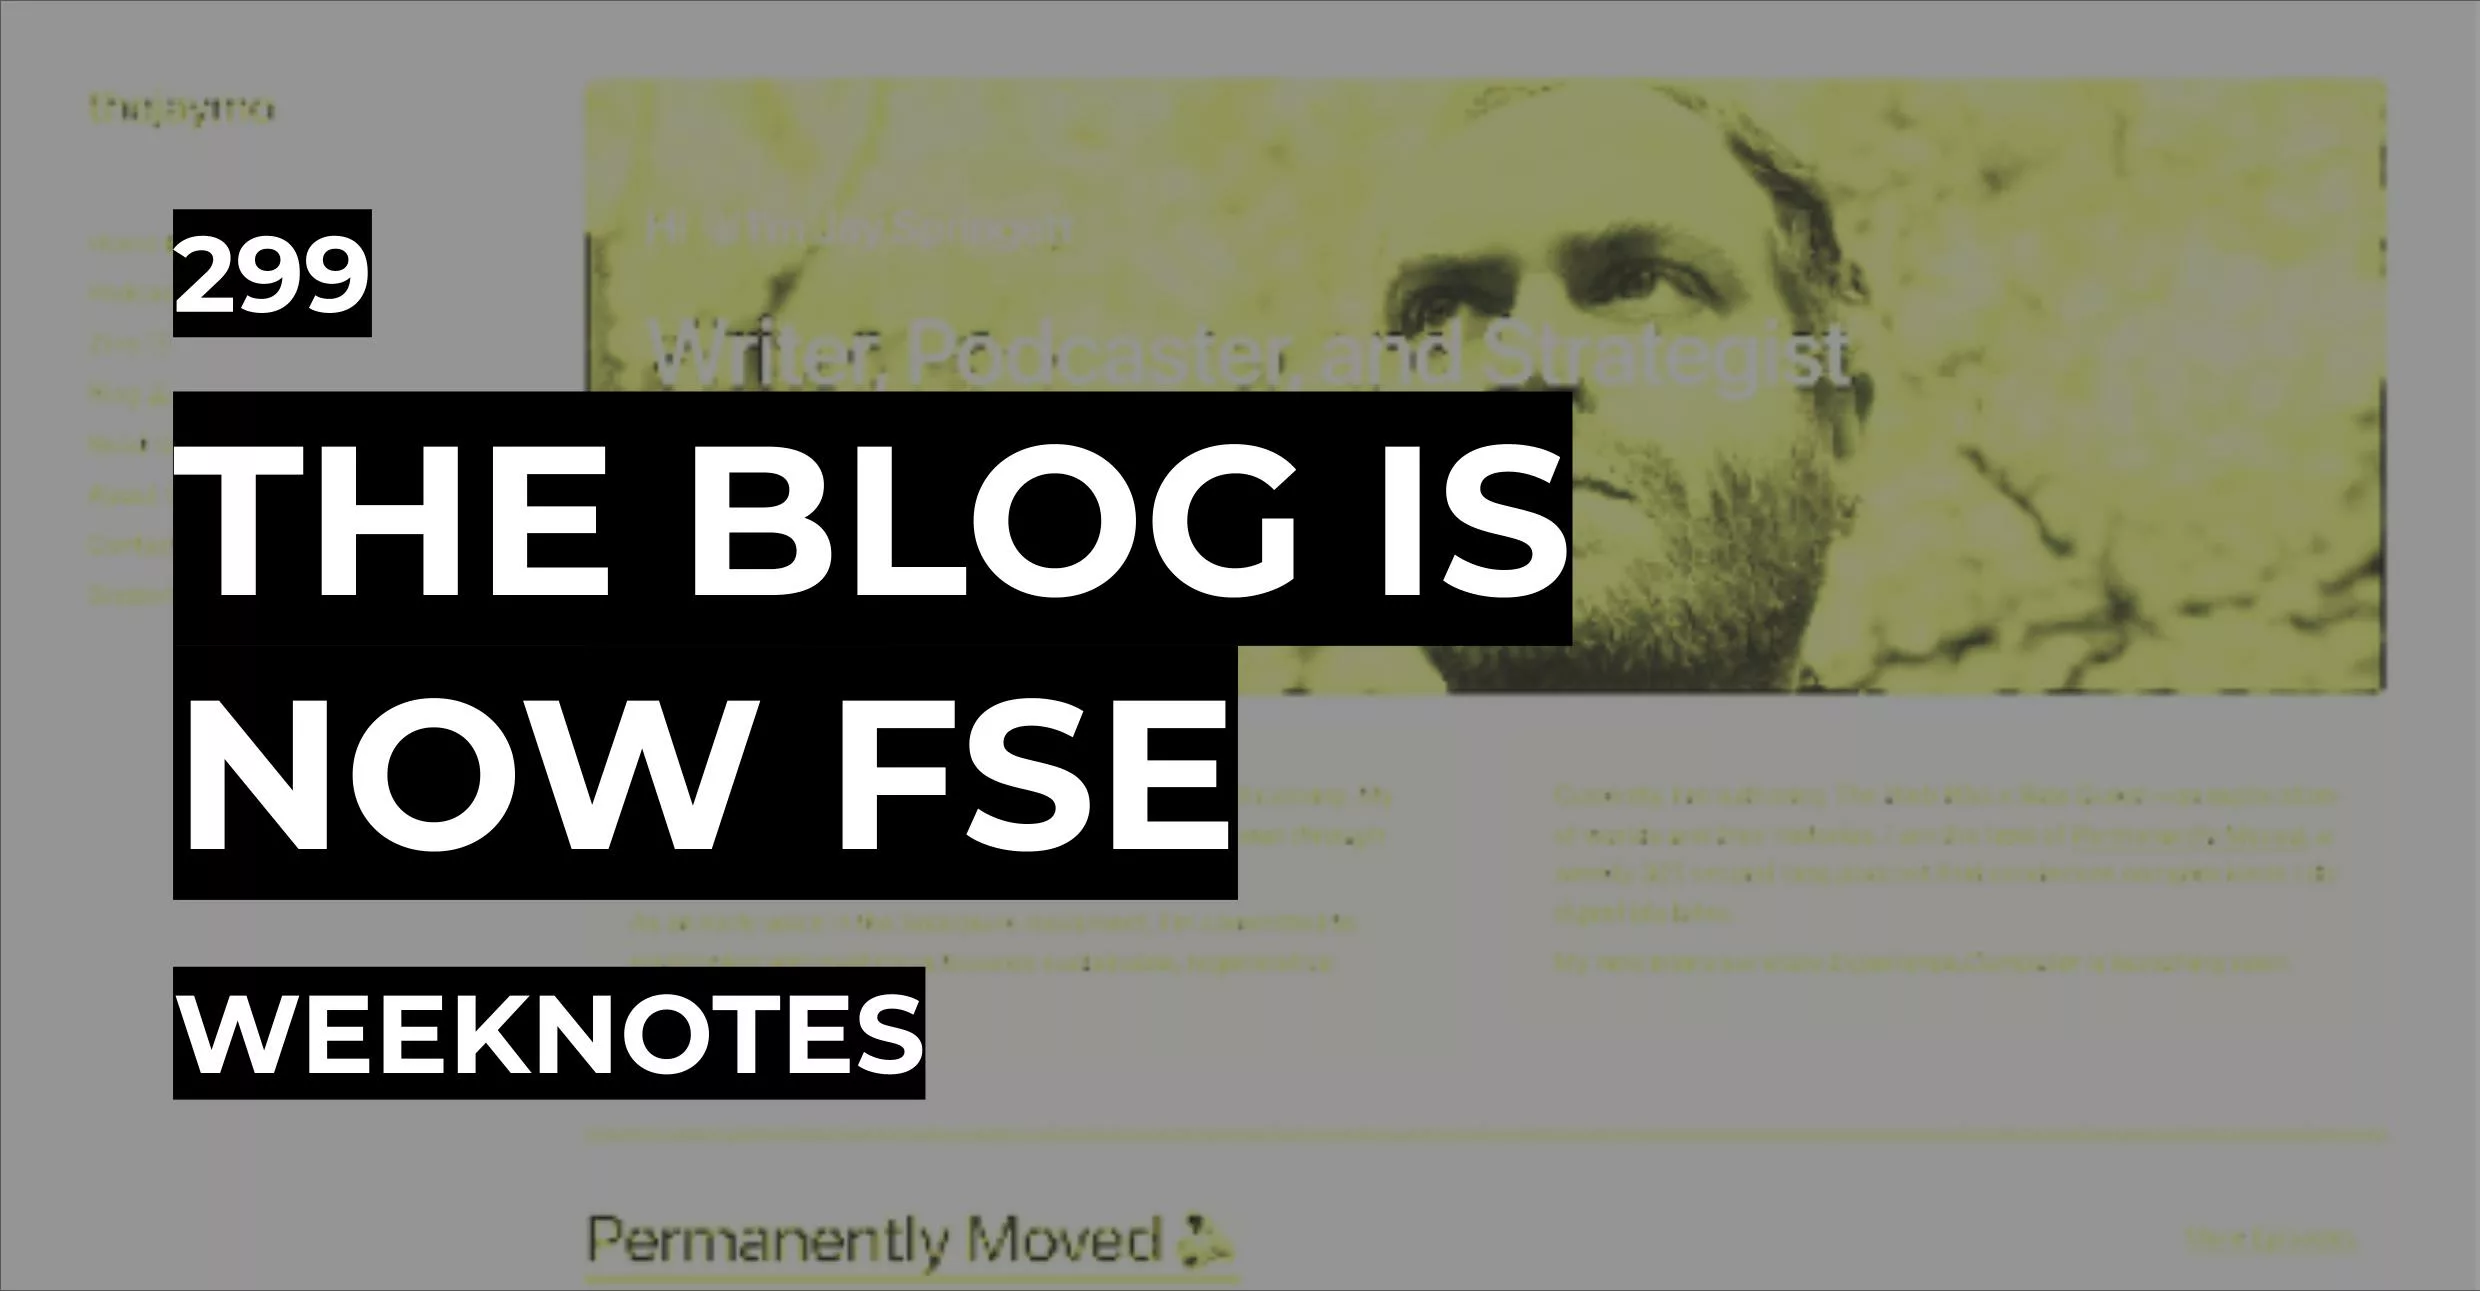 The Blog Is Now FSE